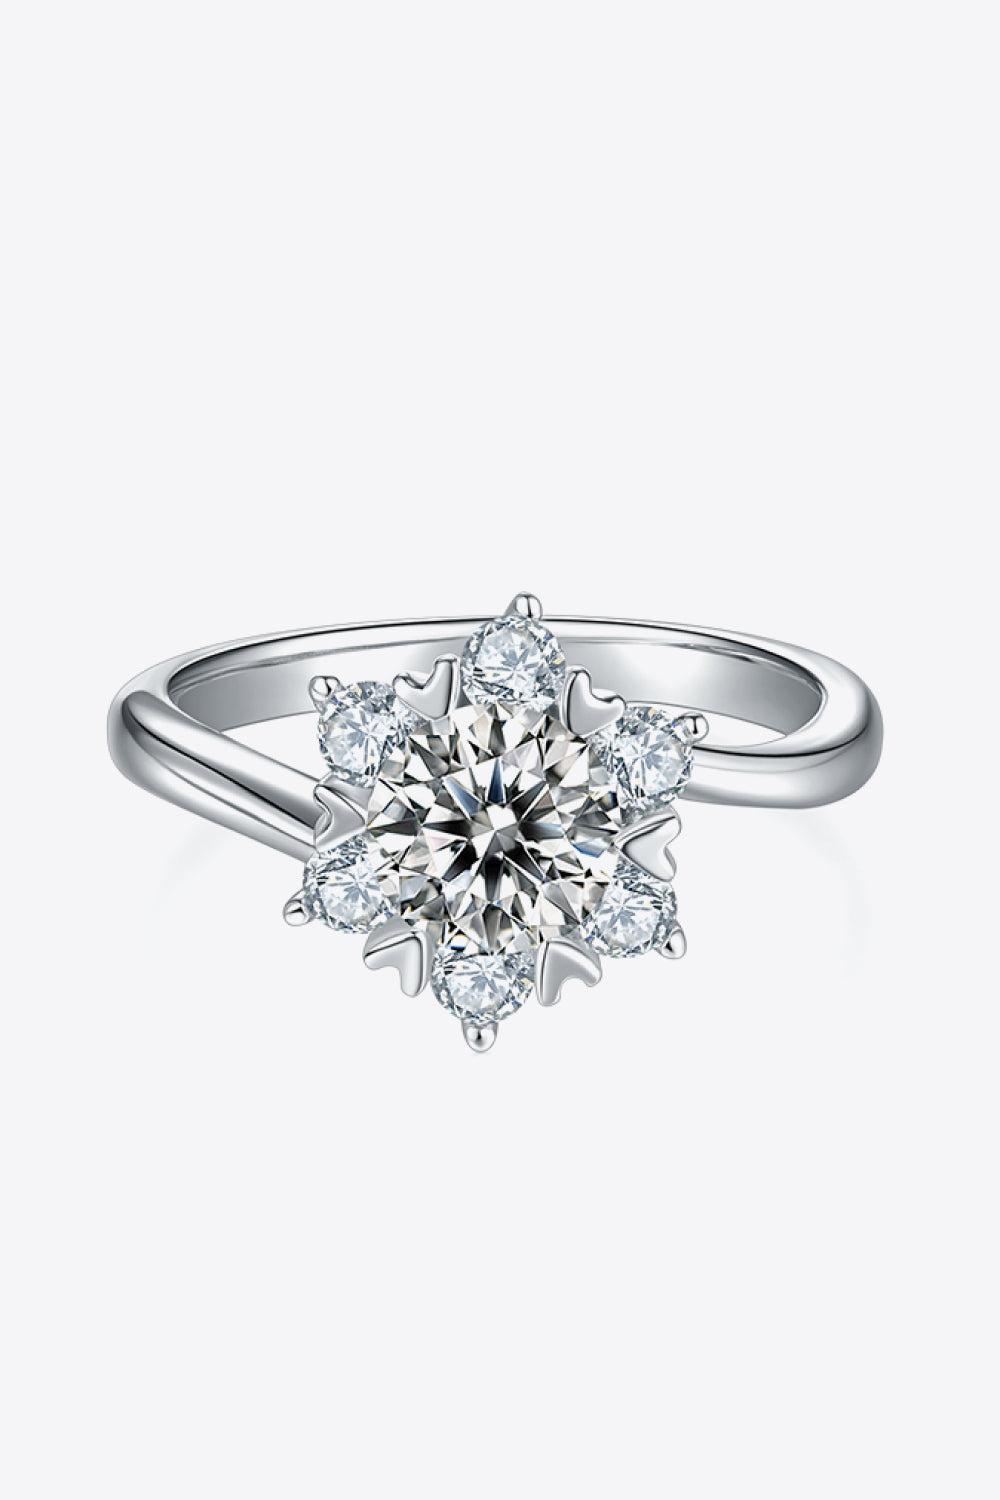 Adored 1 Ct Moissanite 925 Sterling Silver Cluster Ring